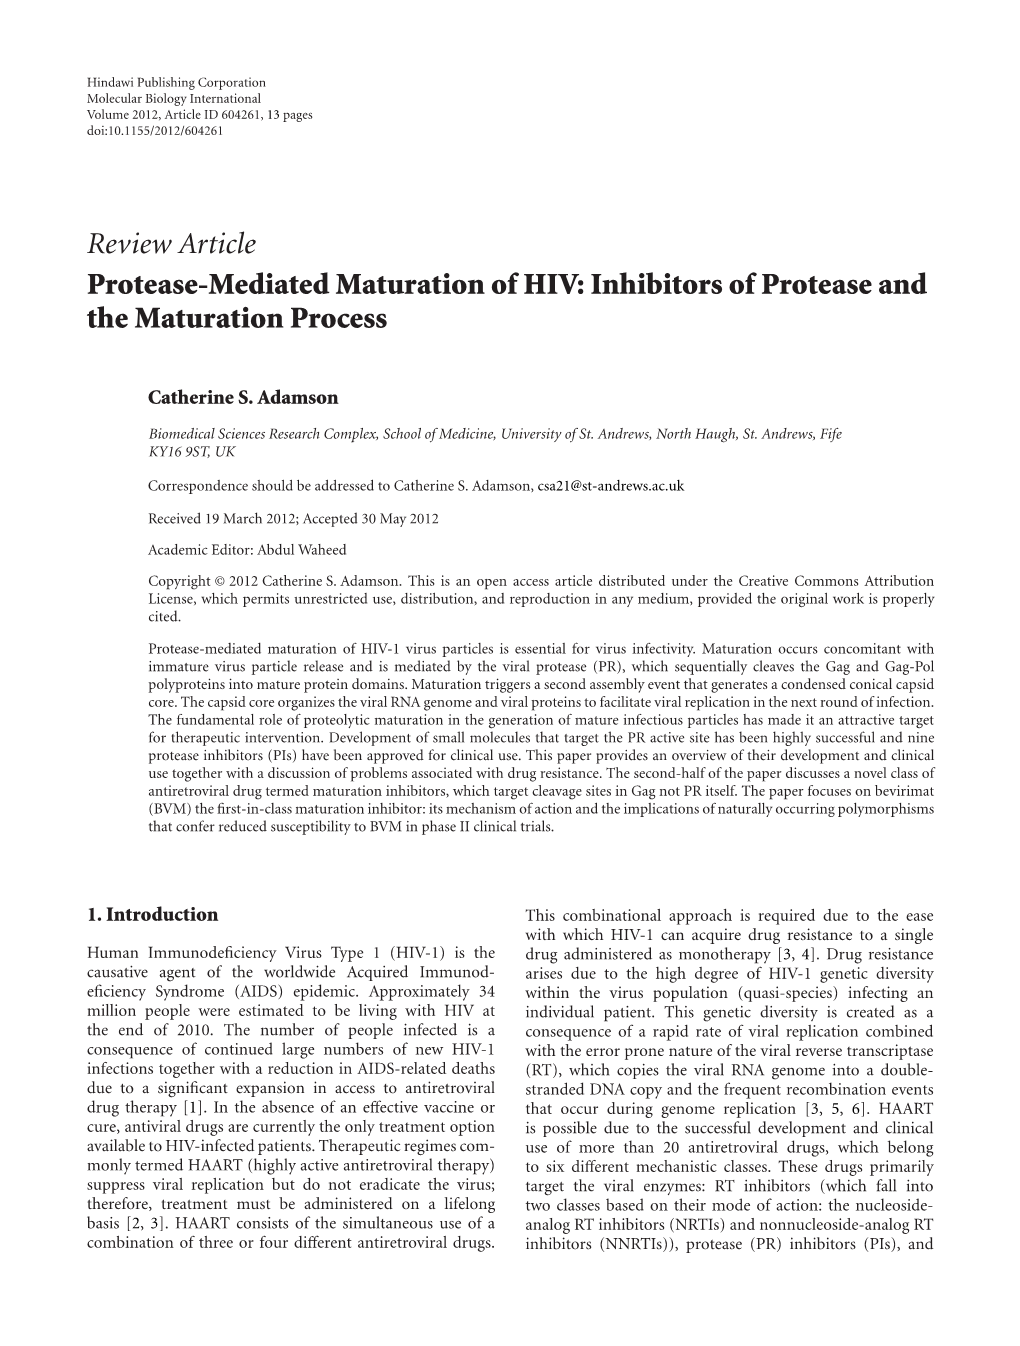 Protease-Mediated Maturation of HIV: Inhibitors of Protease and the Maturation Process